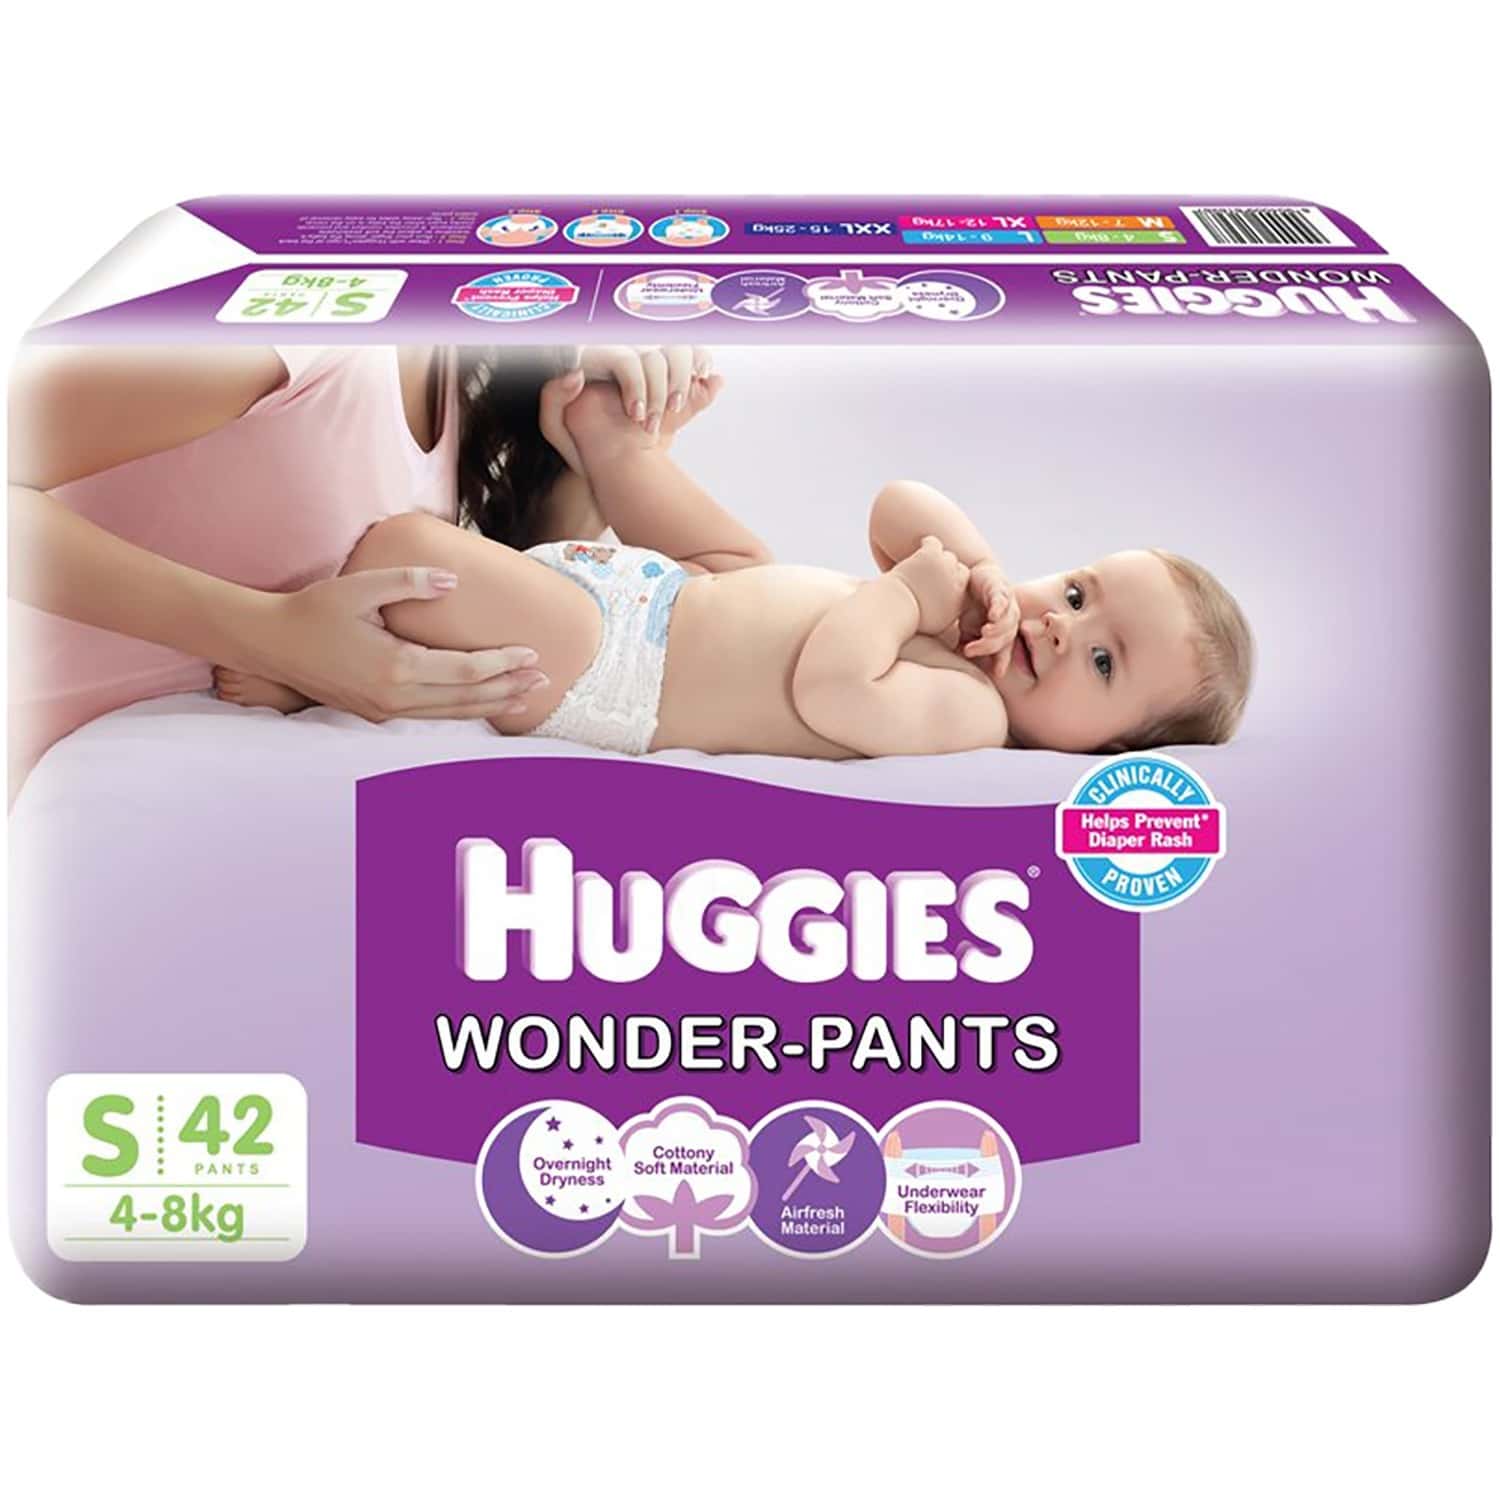 huggies wonder pants small size diapers 42 count 2 1637912948